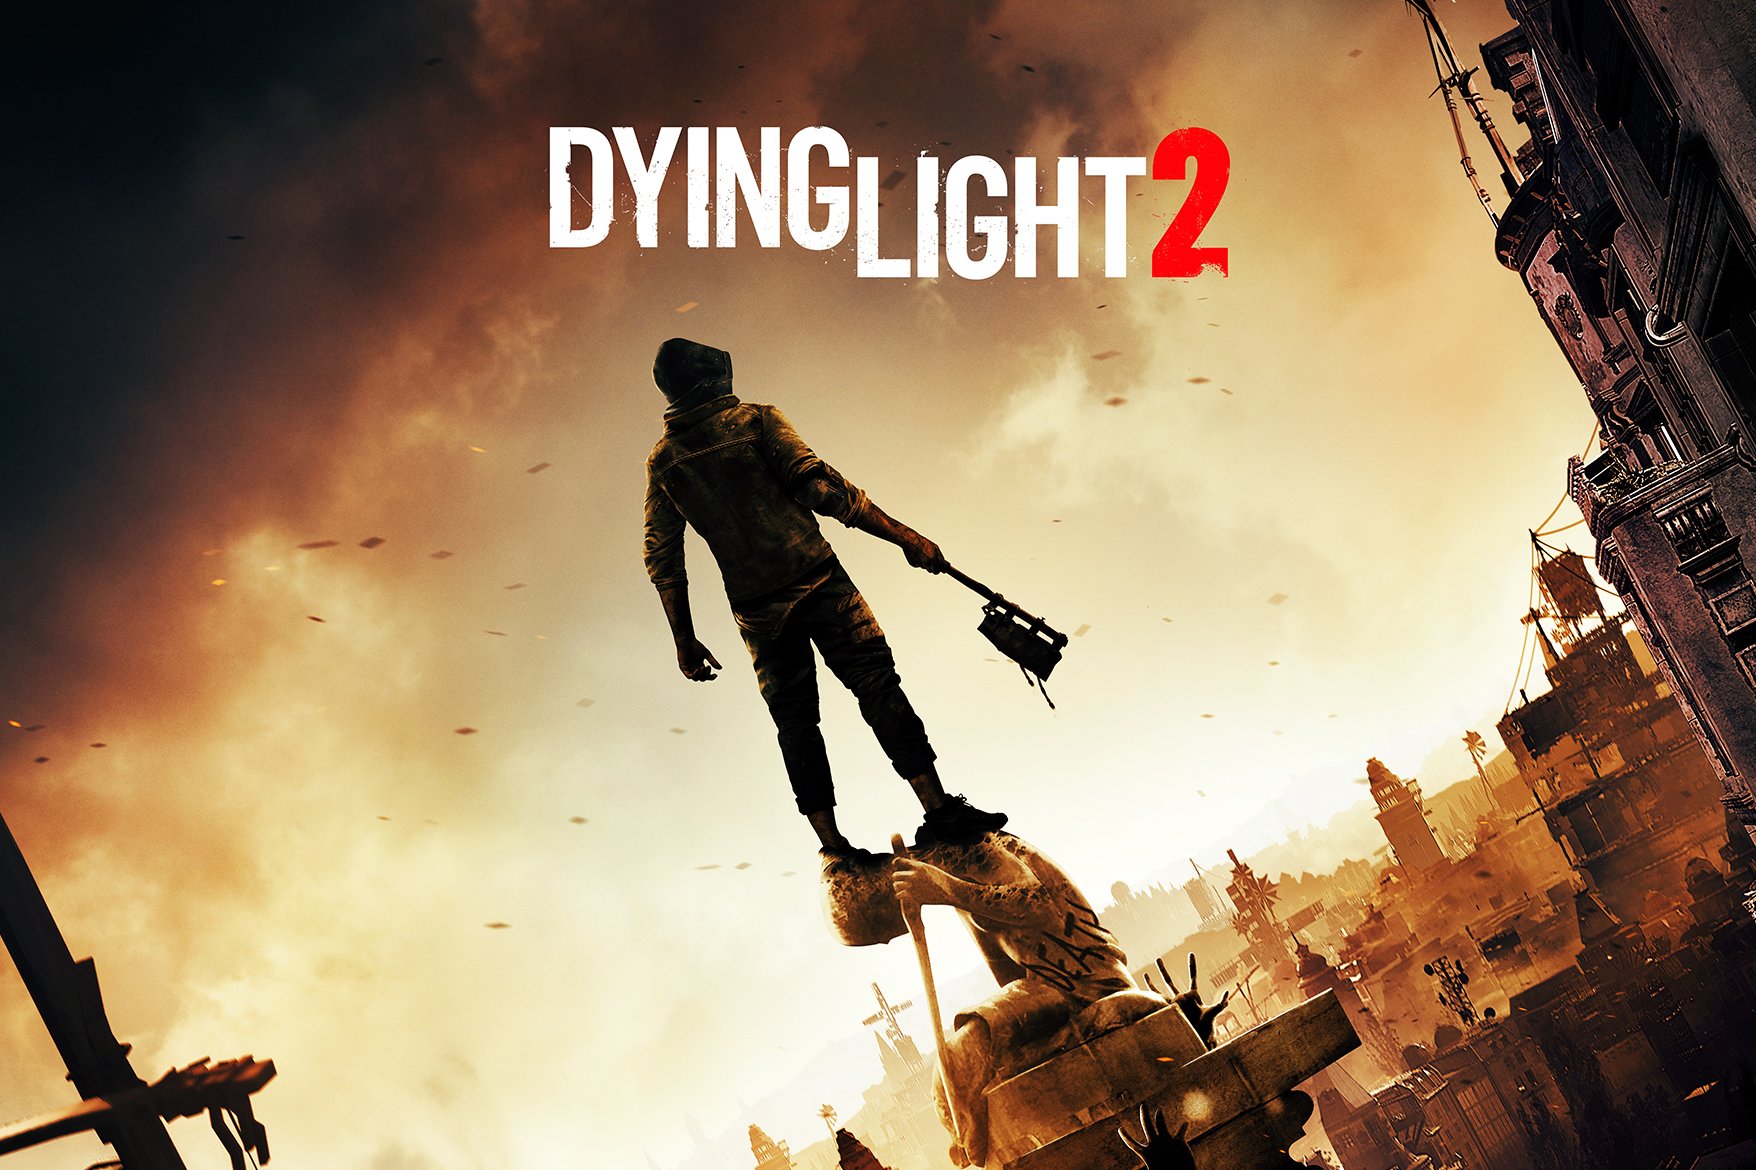 You can play 4-player co-op in Dying Light 2, but one of you must host